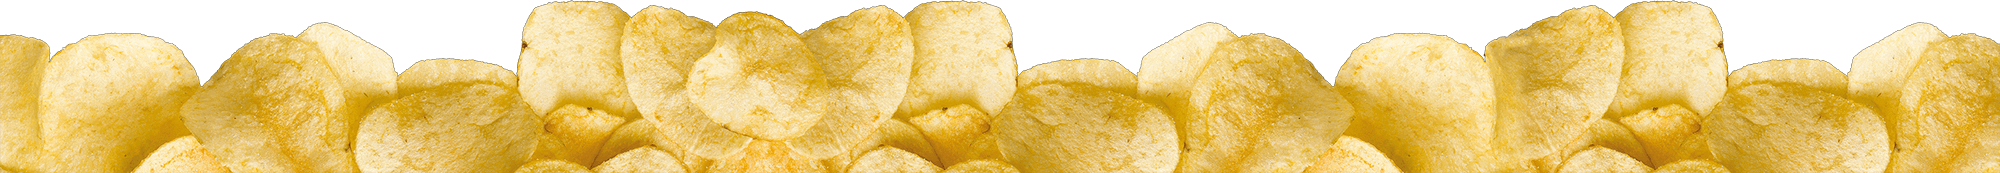 chips-footer-trans